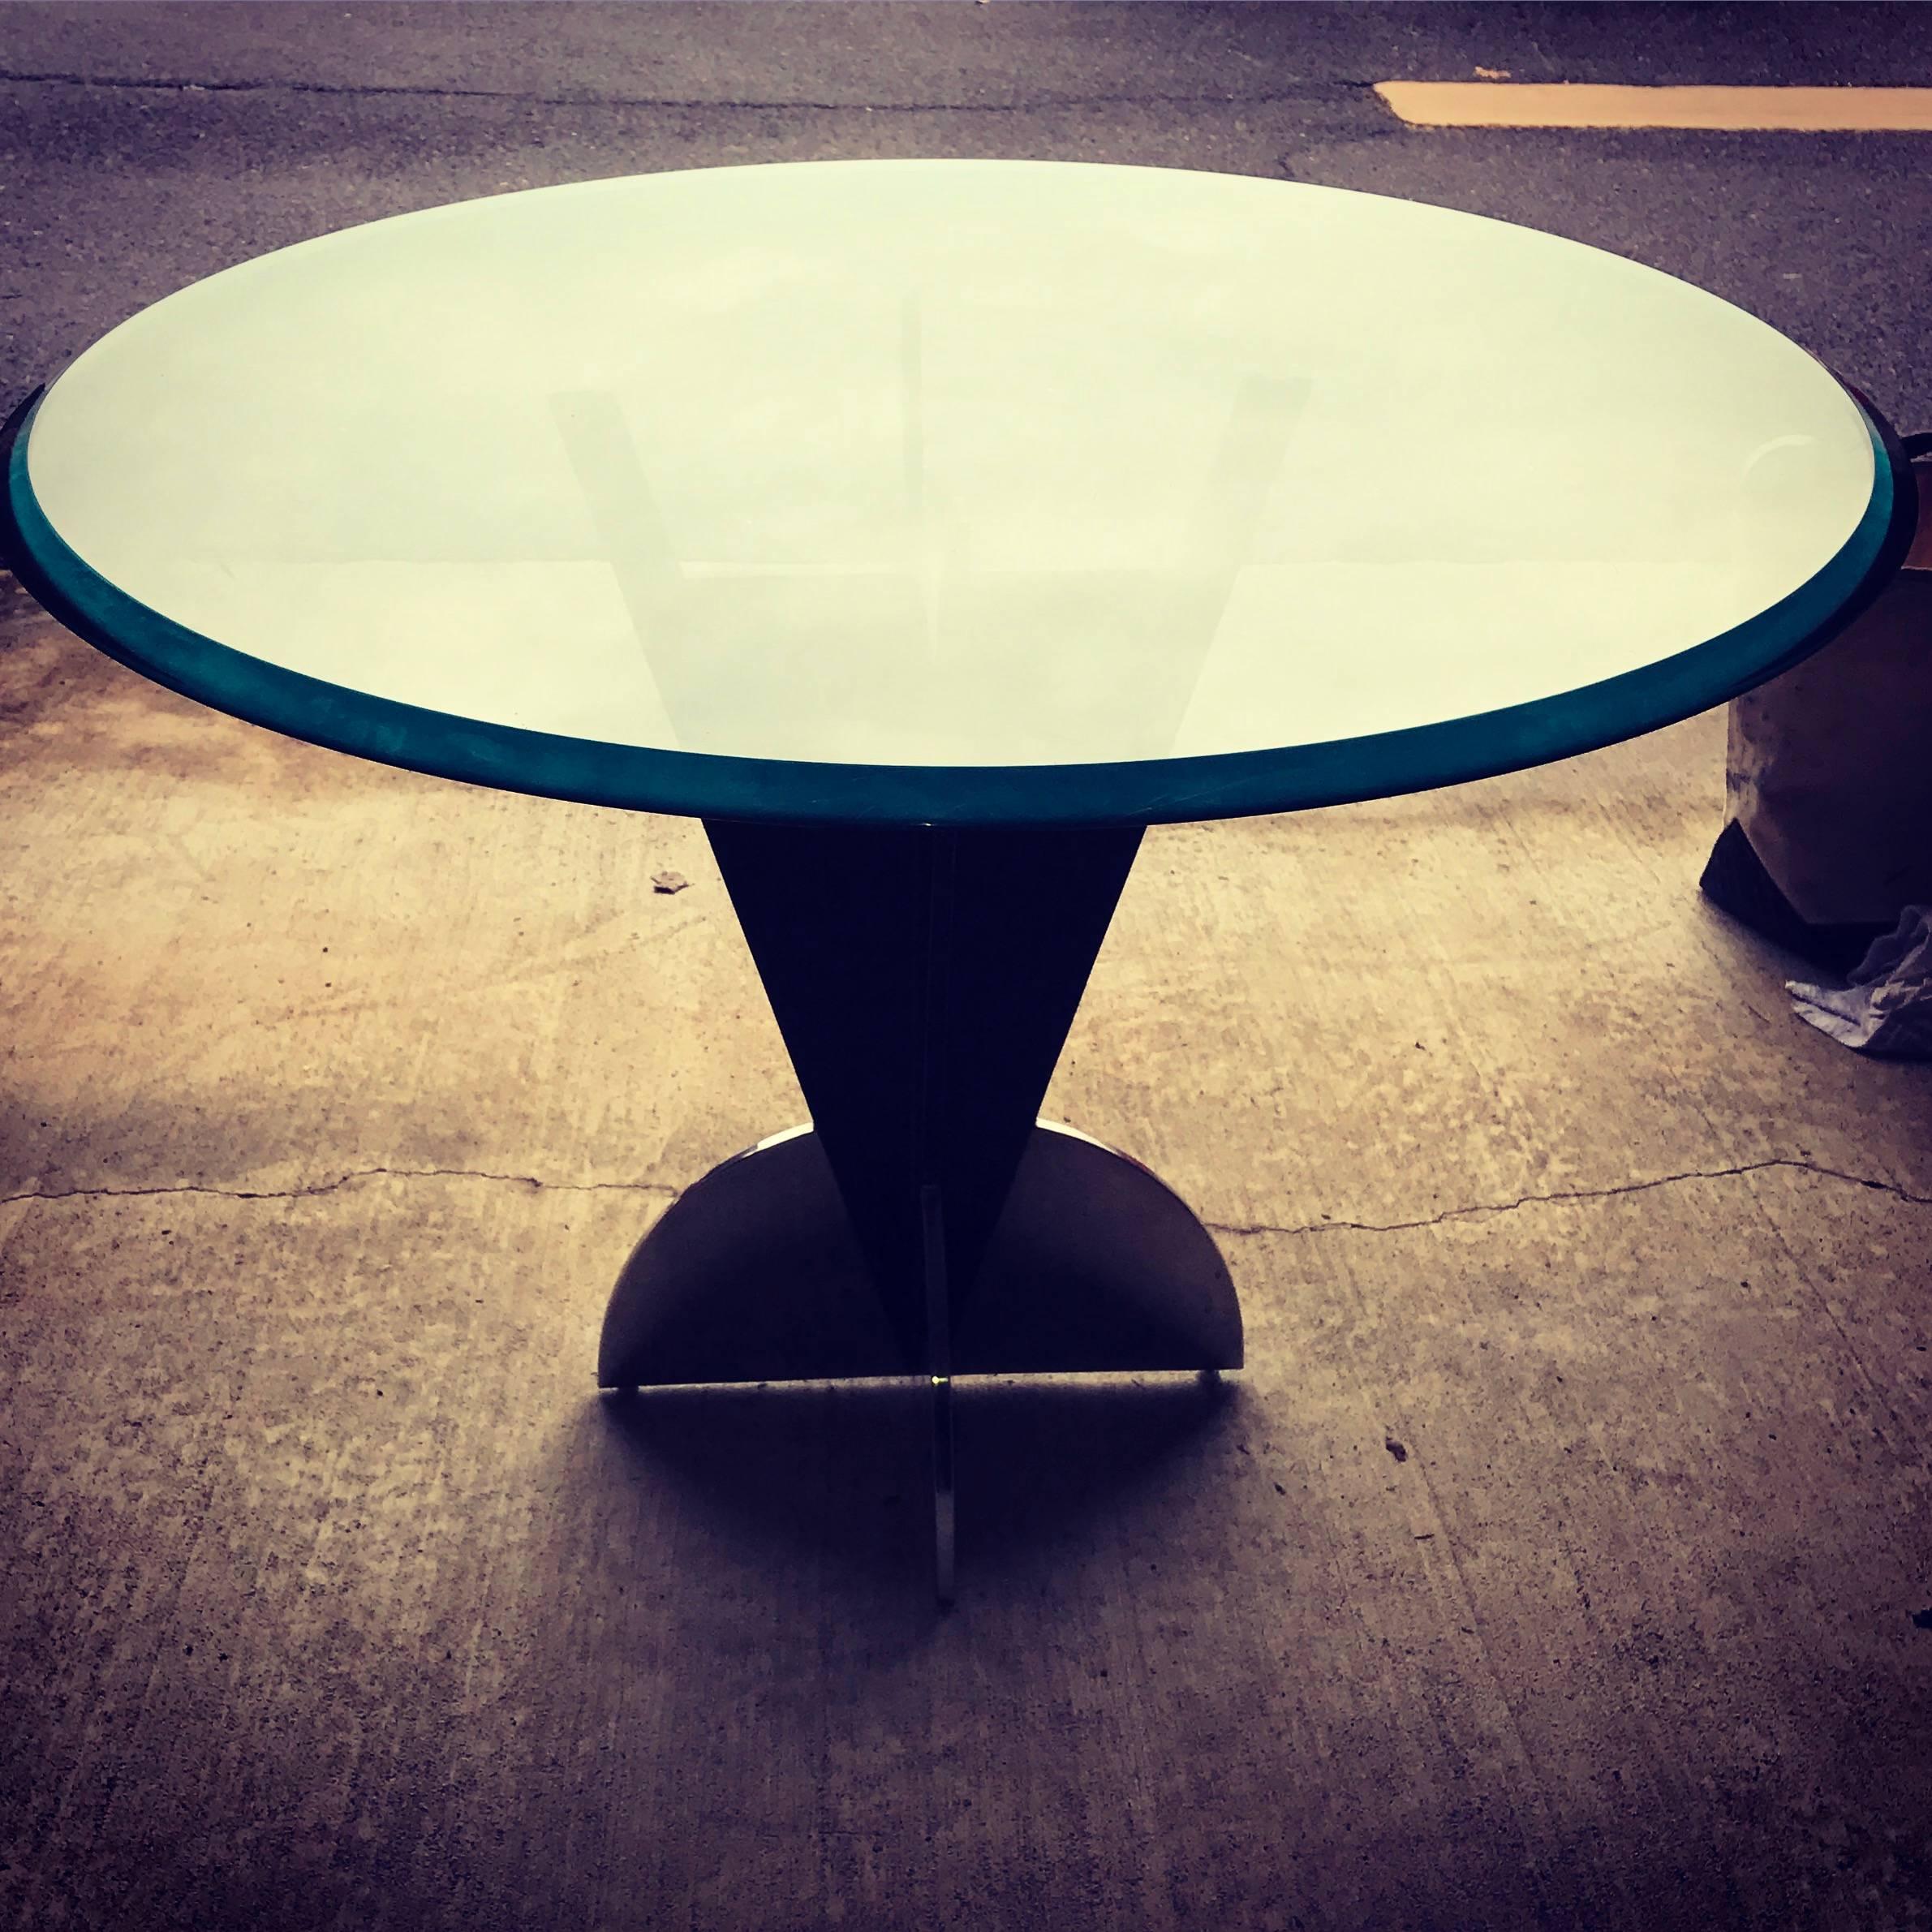 American Modern Steel Dining Table With Round Tinted Glass Top  1